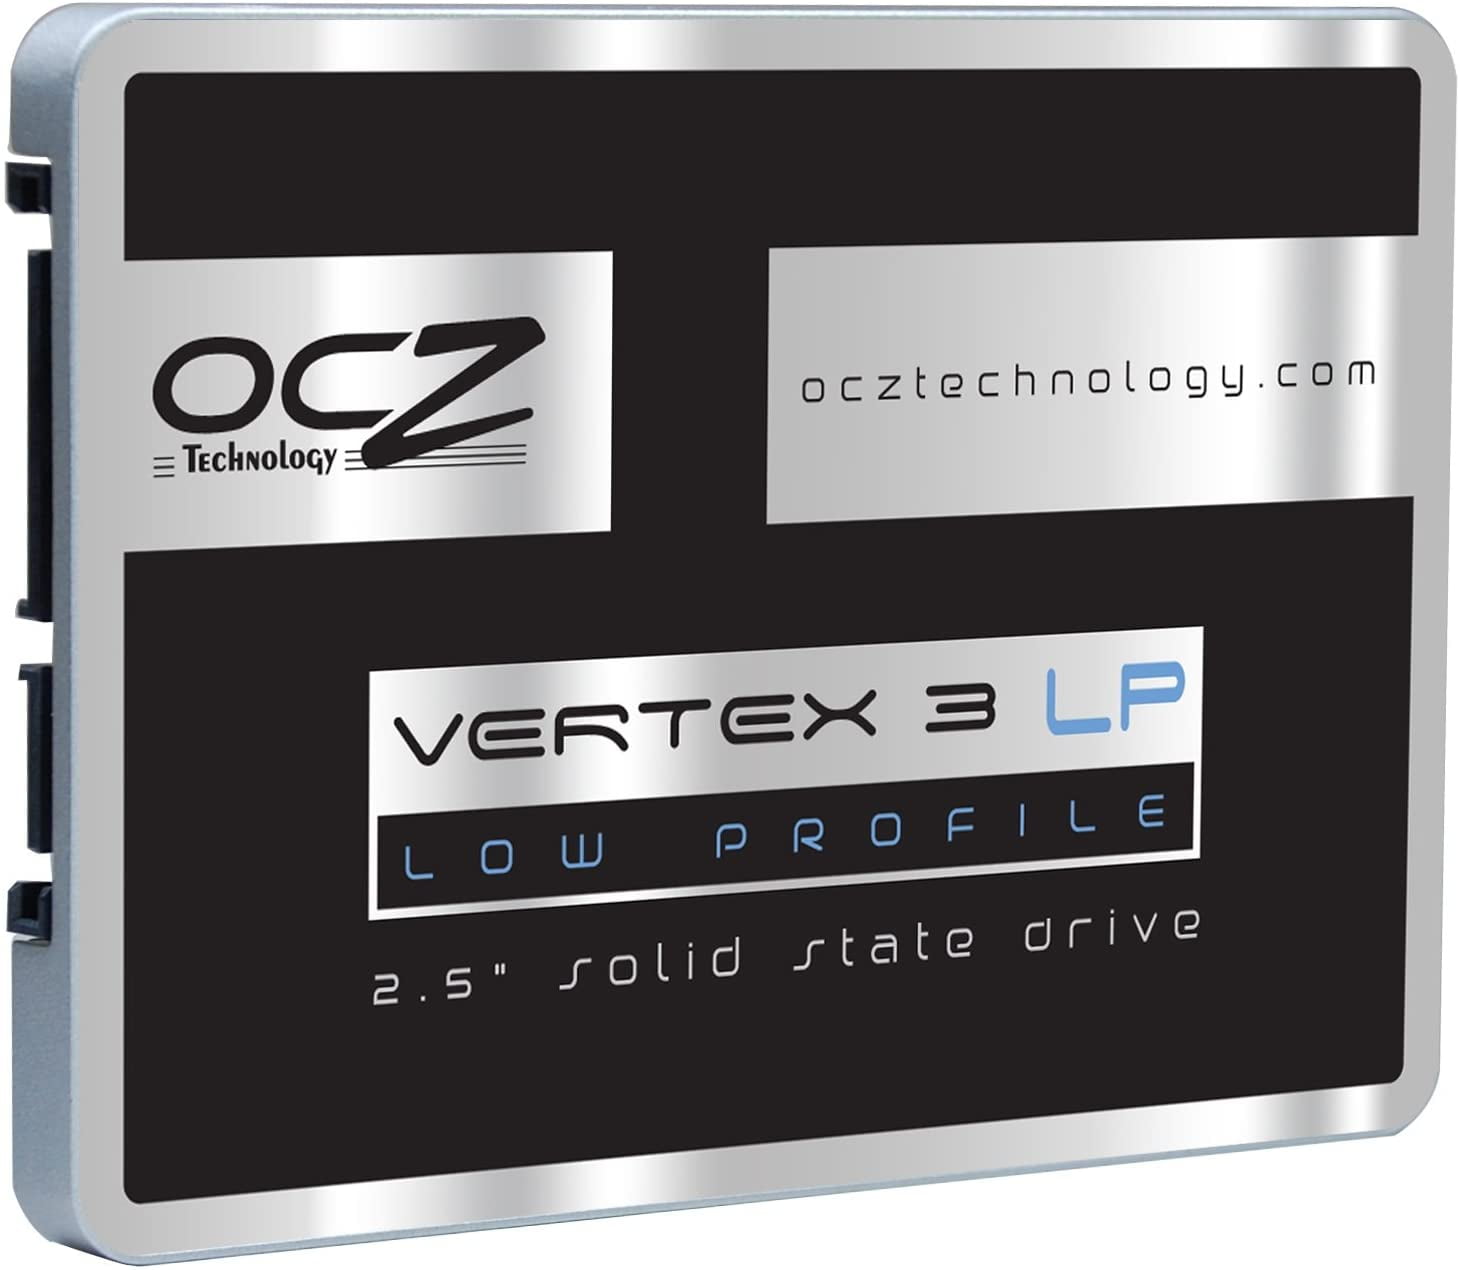 OCZ 120GB Vertex 3 Harnessing SATA 6Gb/s 2.5" Low Profile 7mm form factor SSD with Max 550MB/s Read and Max 4KB Write 85K IOPS For Ultrabook - VTX3LP-25SAT3-120G